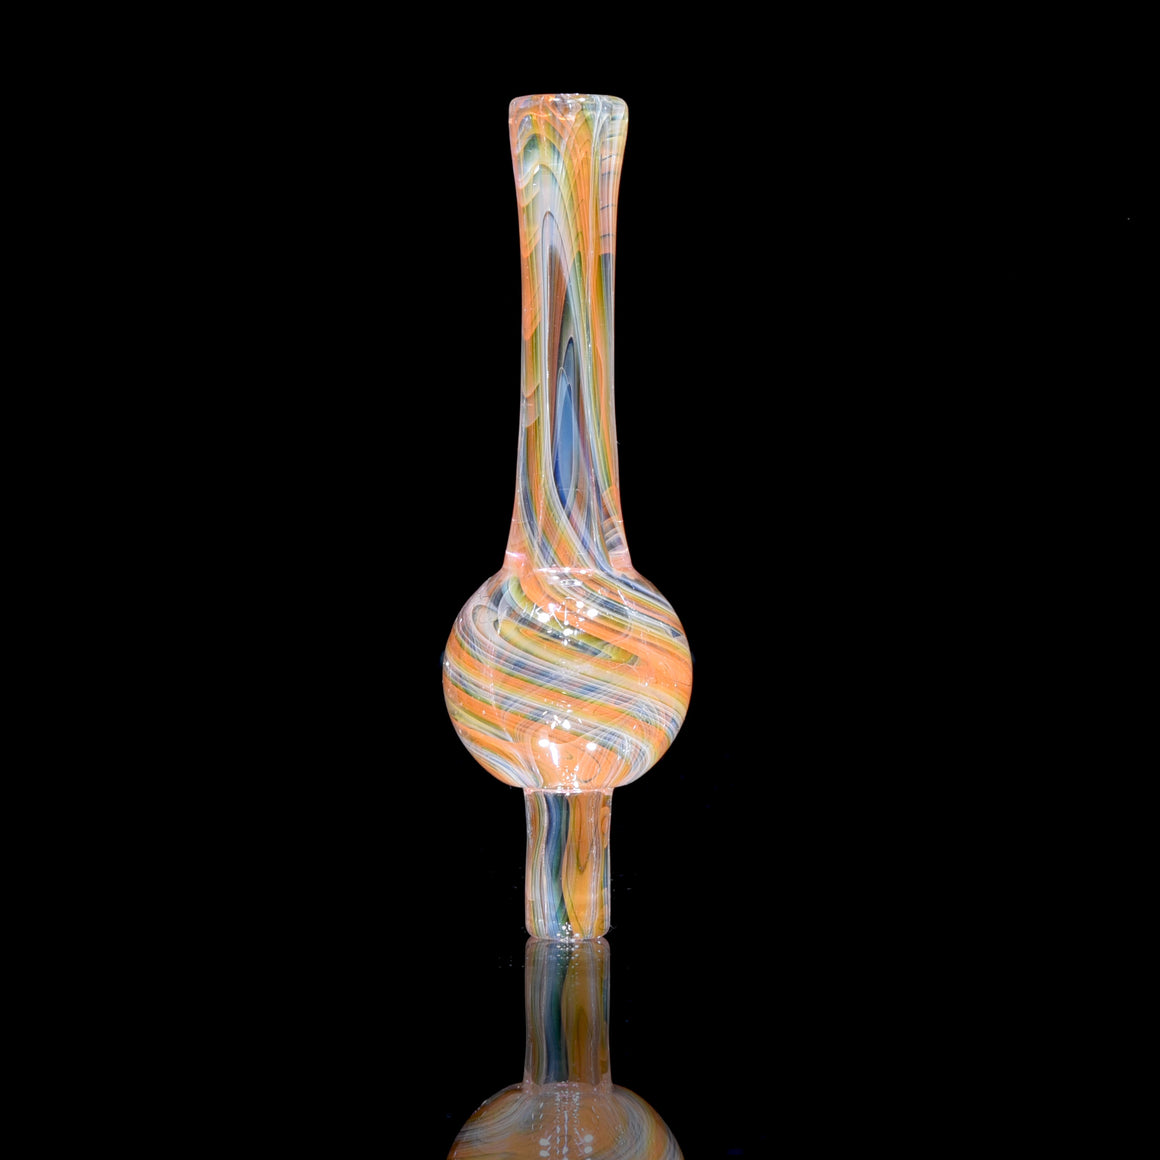 Fully-worked Fumed Bubble Cap